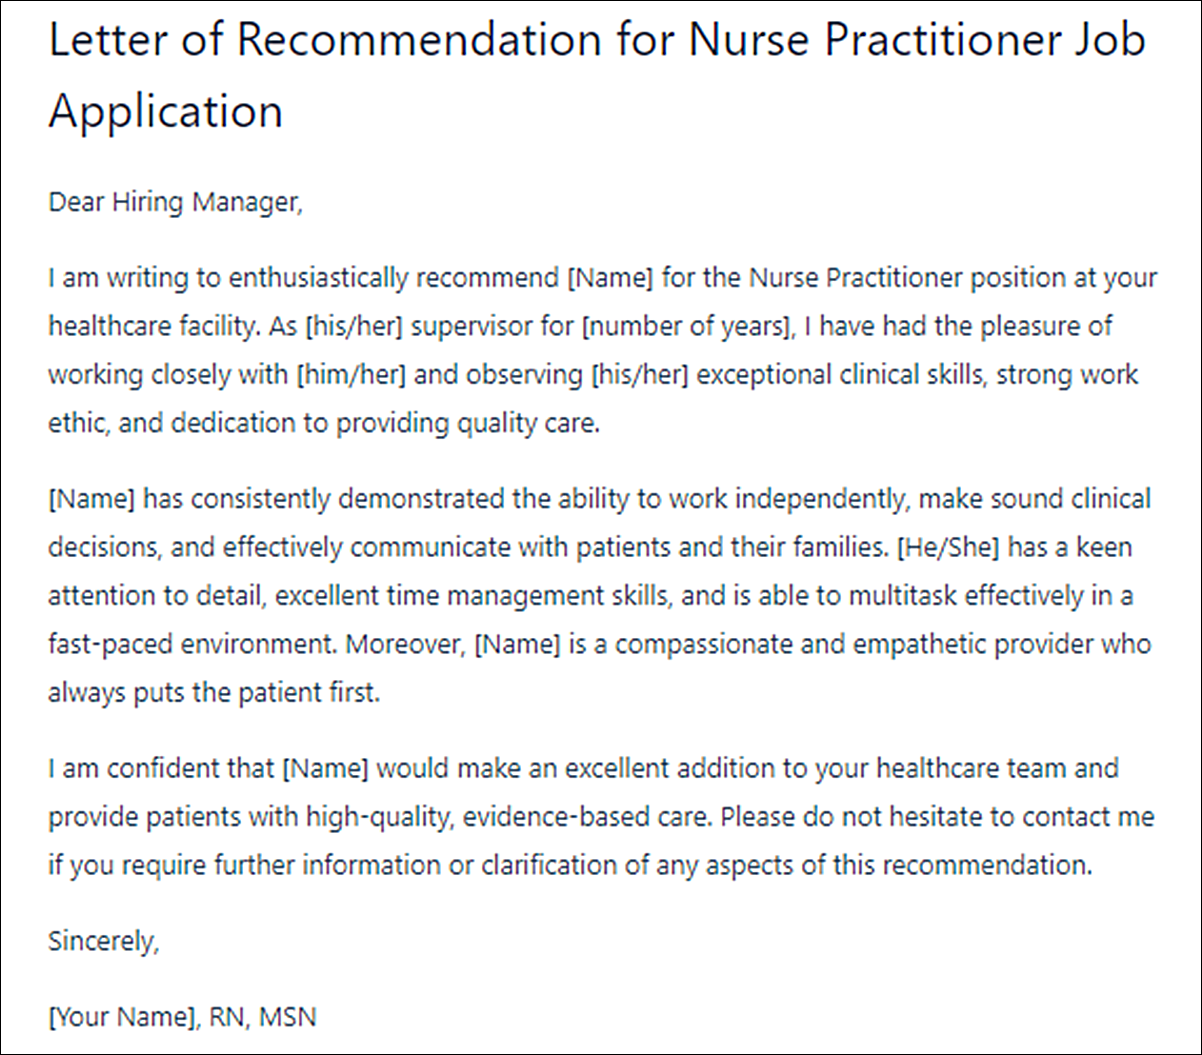 Nurse Practitioner Letter of Recommendation Template